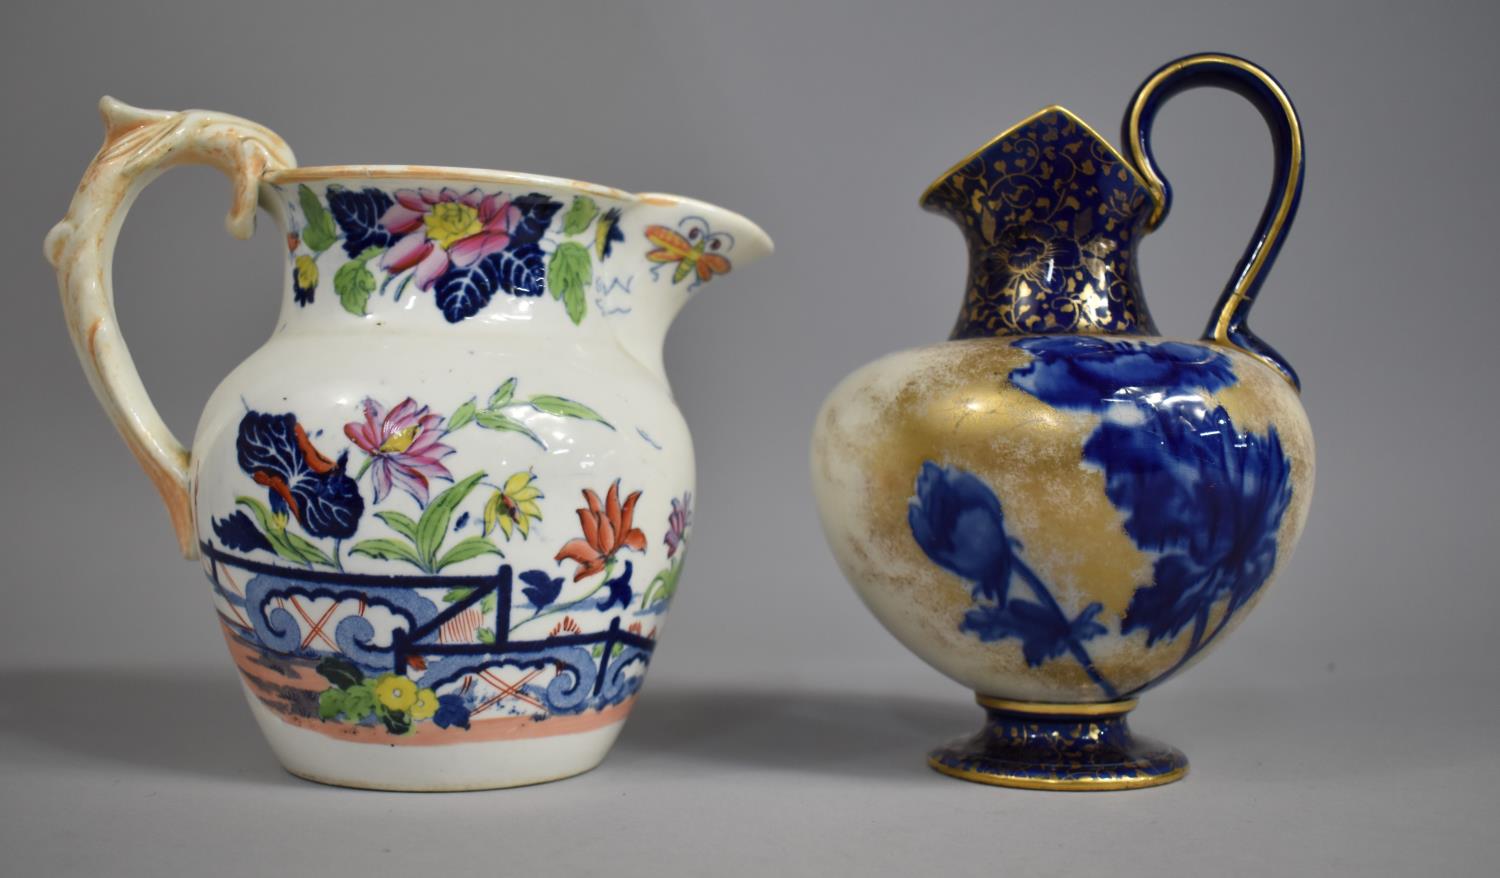 A Doulton Flow Blue Ewer, 18.5cm high (Handle Glued) Together with a 19th Century Jug with